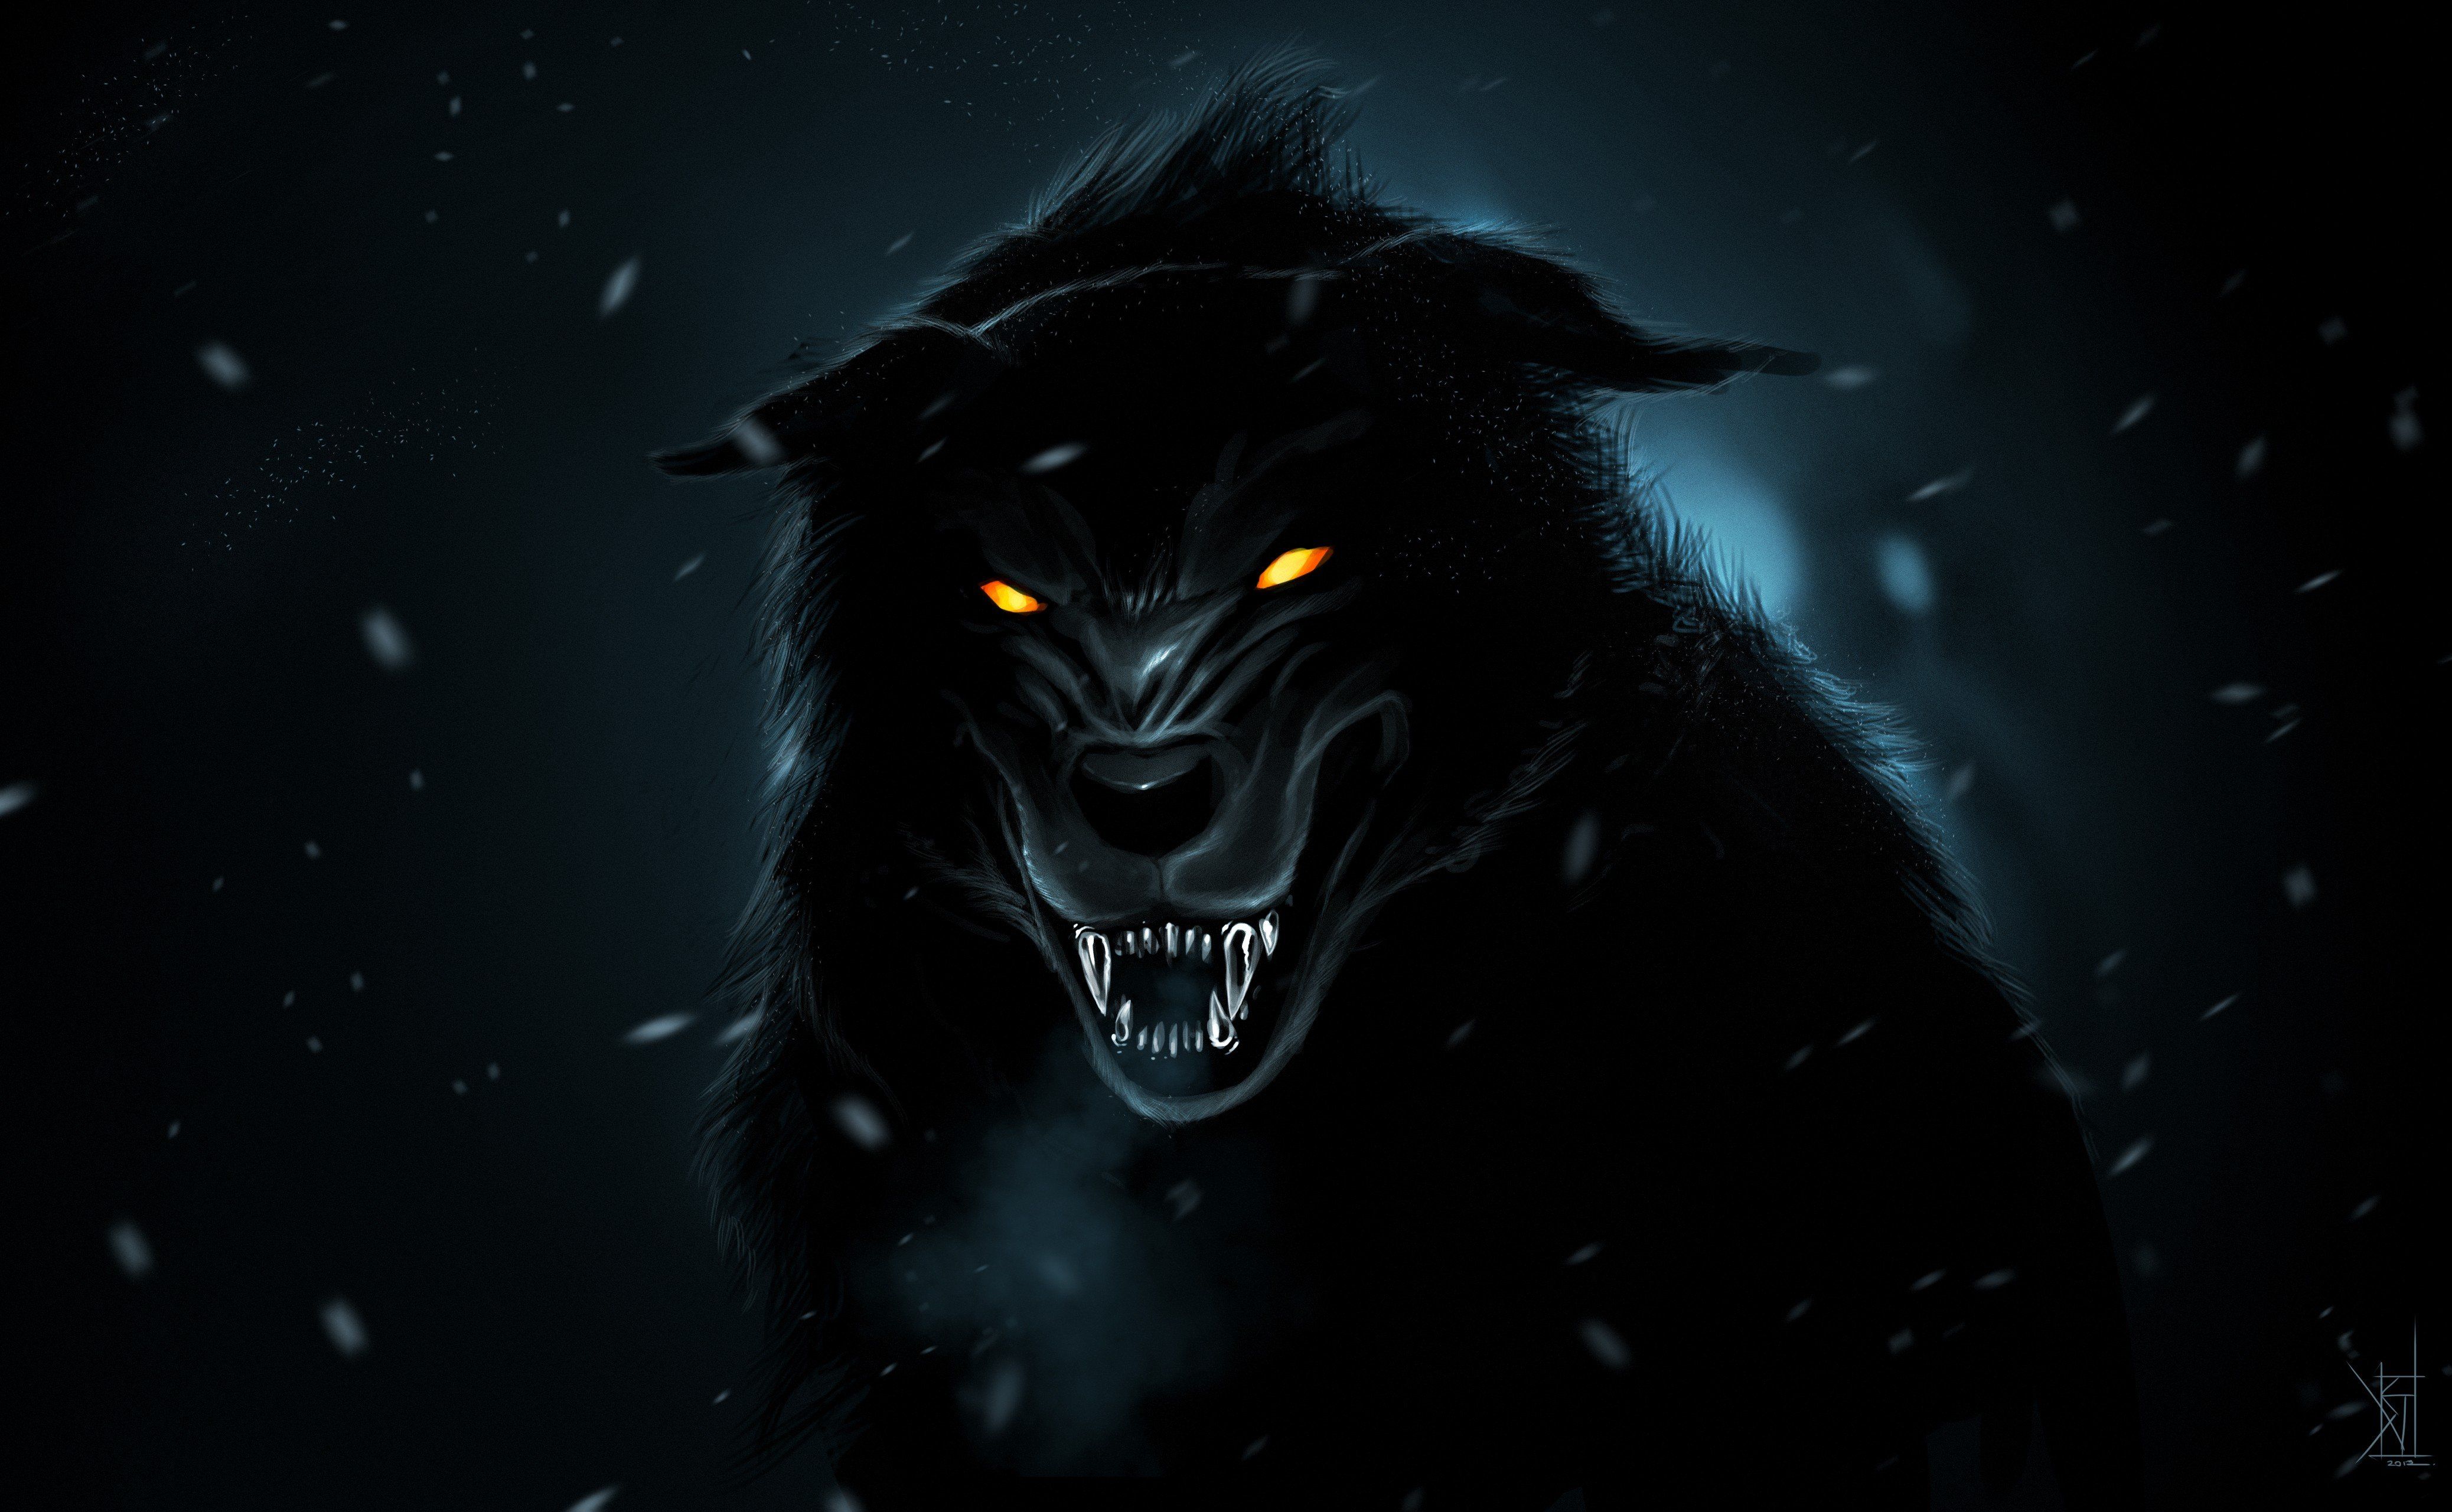 Download HD Wallpaper Of 408864 Orange_eyes, Wolf. Free Download High Quality And Widescreen Resolutions Desktop Backgro. Wolf Wallpaper, Black Wolf, Shadow Wolf